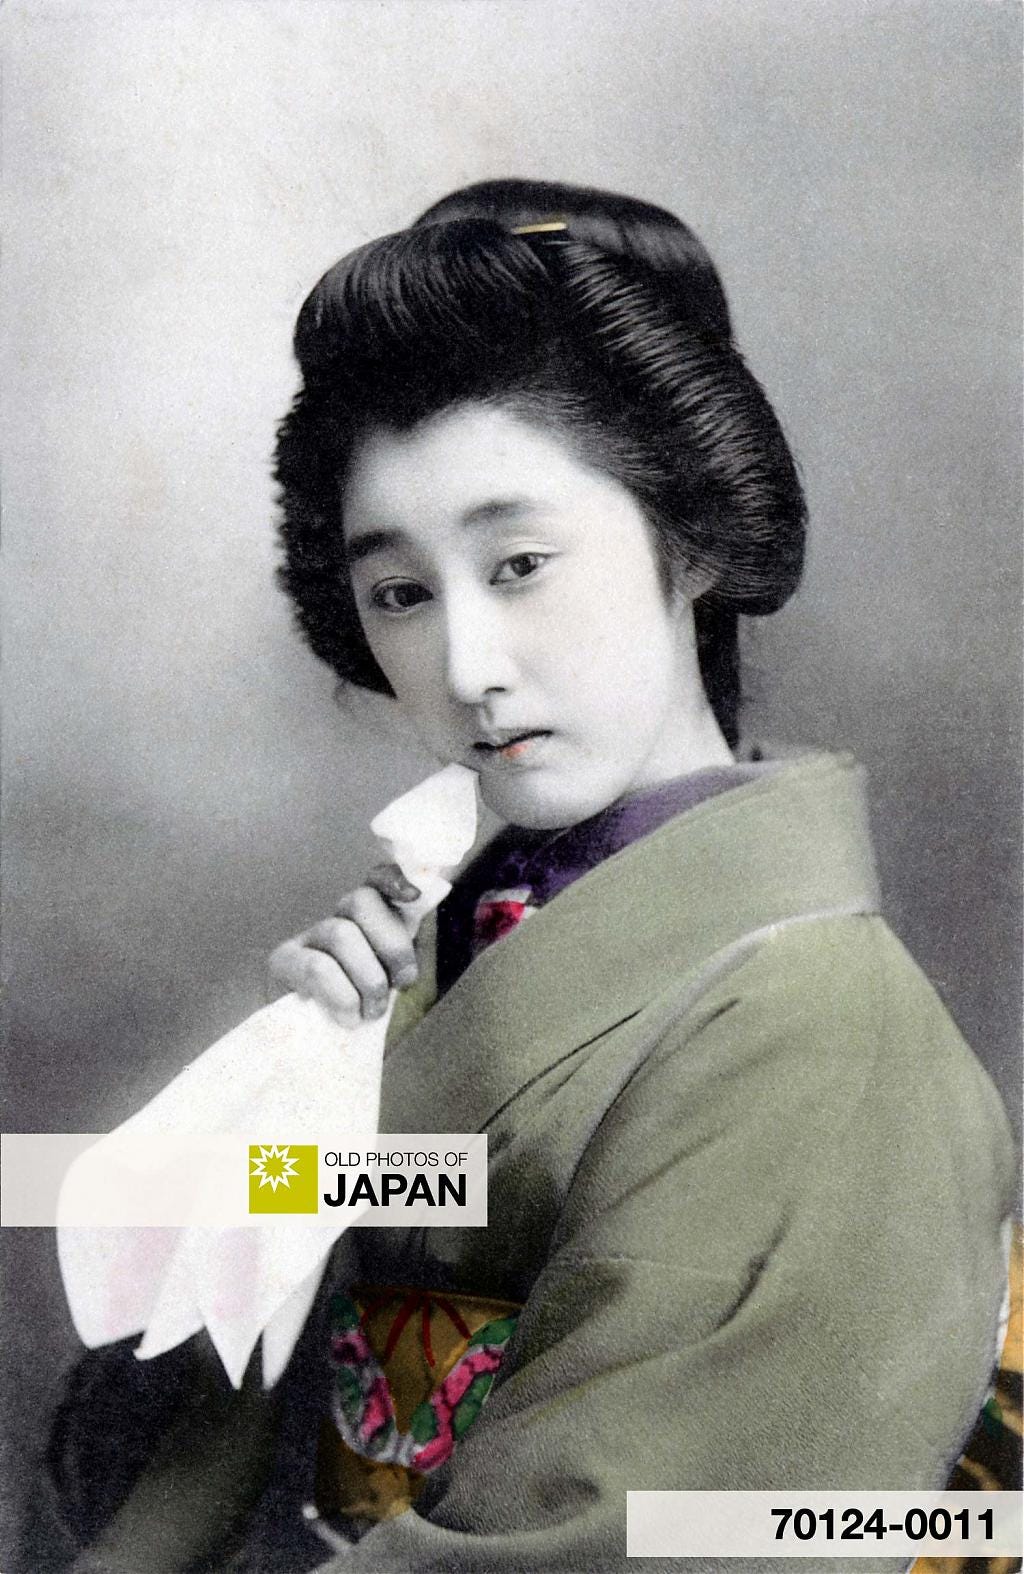 70124-0011 - Japanese woman with Handkerchief, 1910s